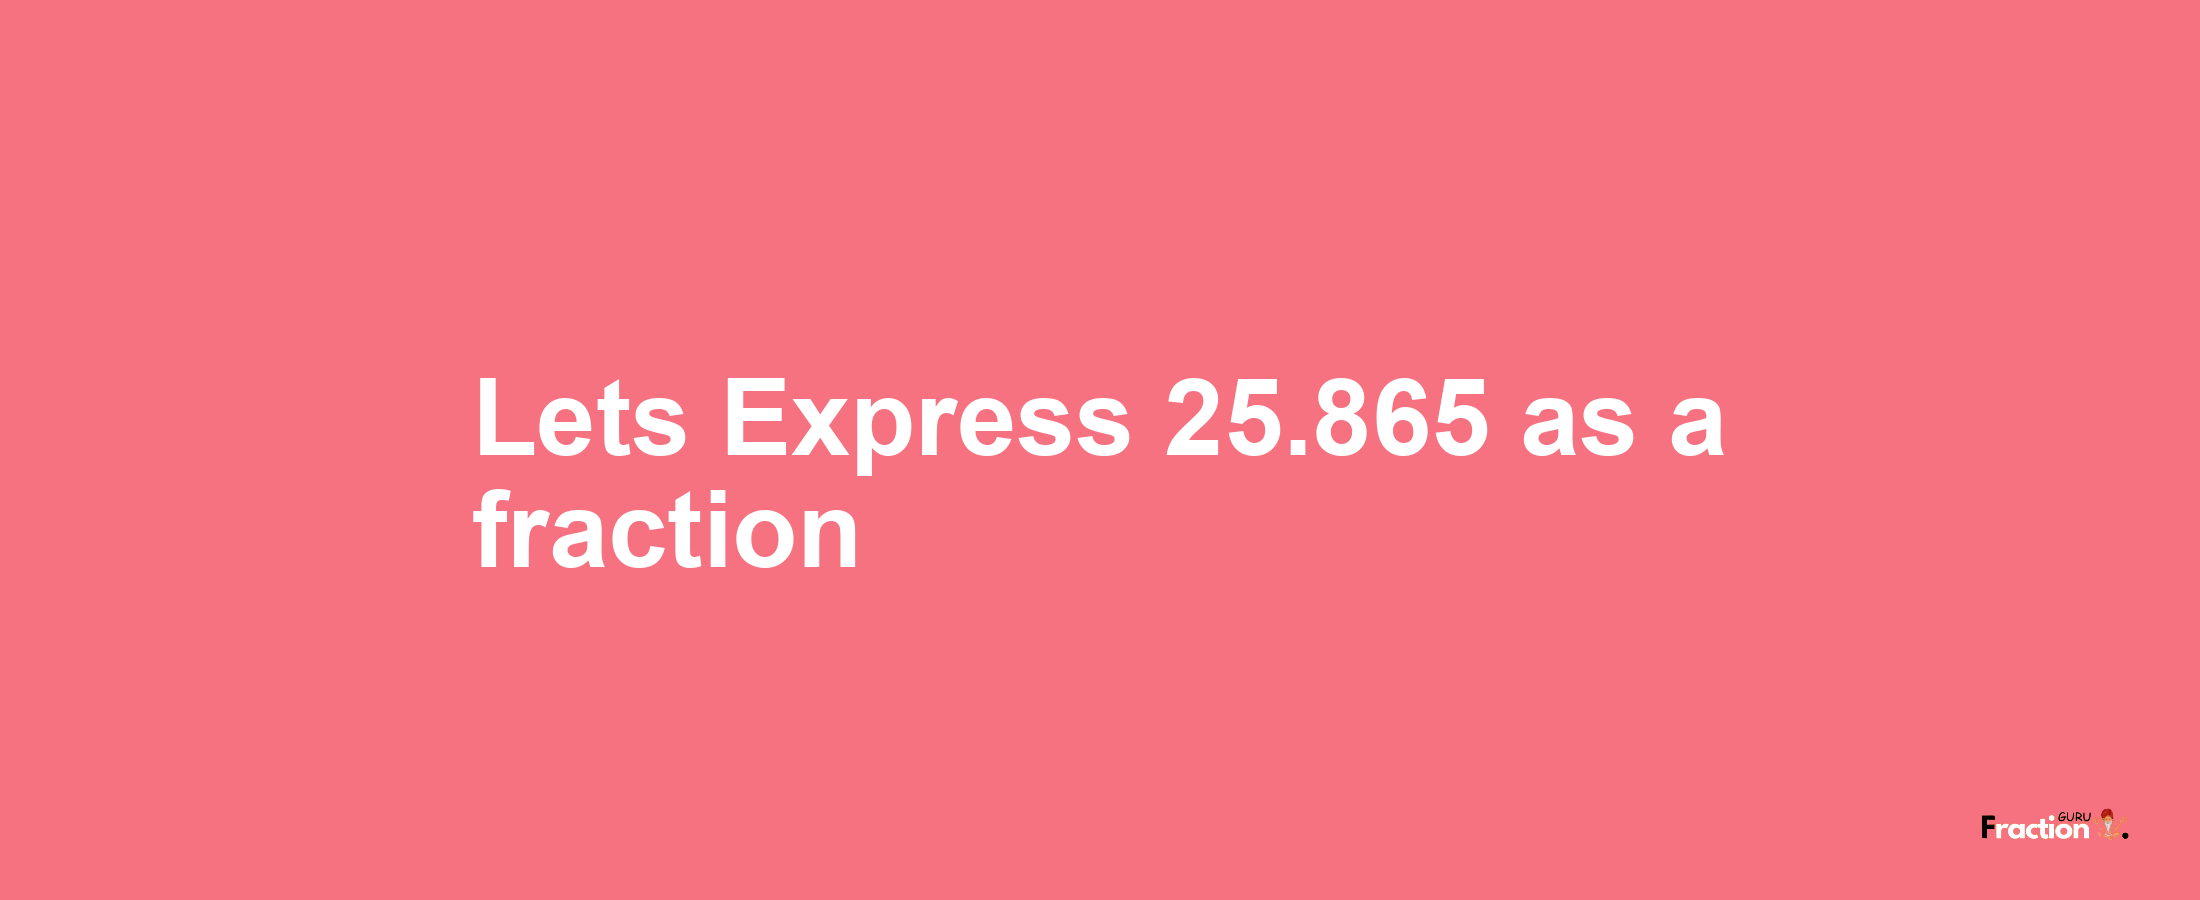 Lets Express 25.865 as afraction